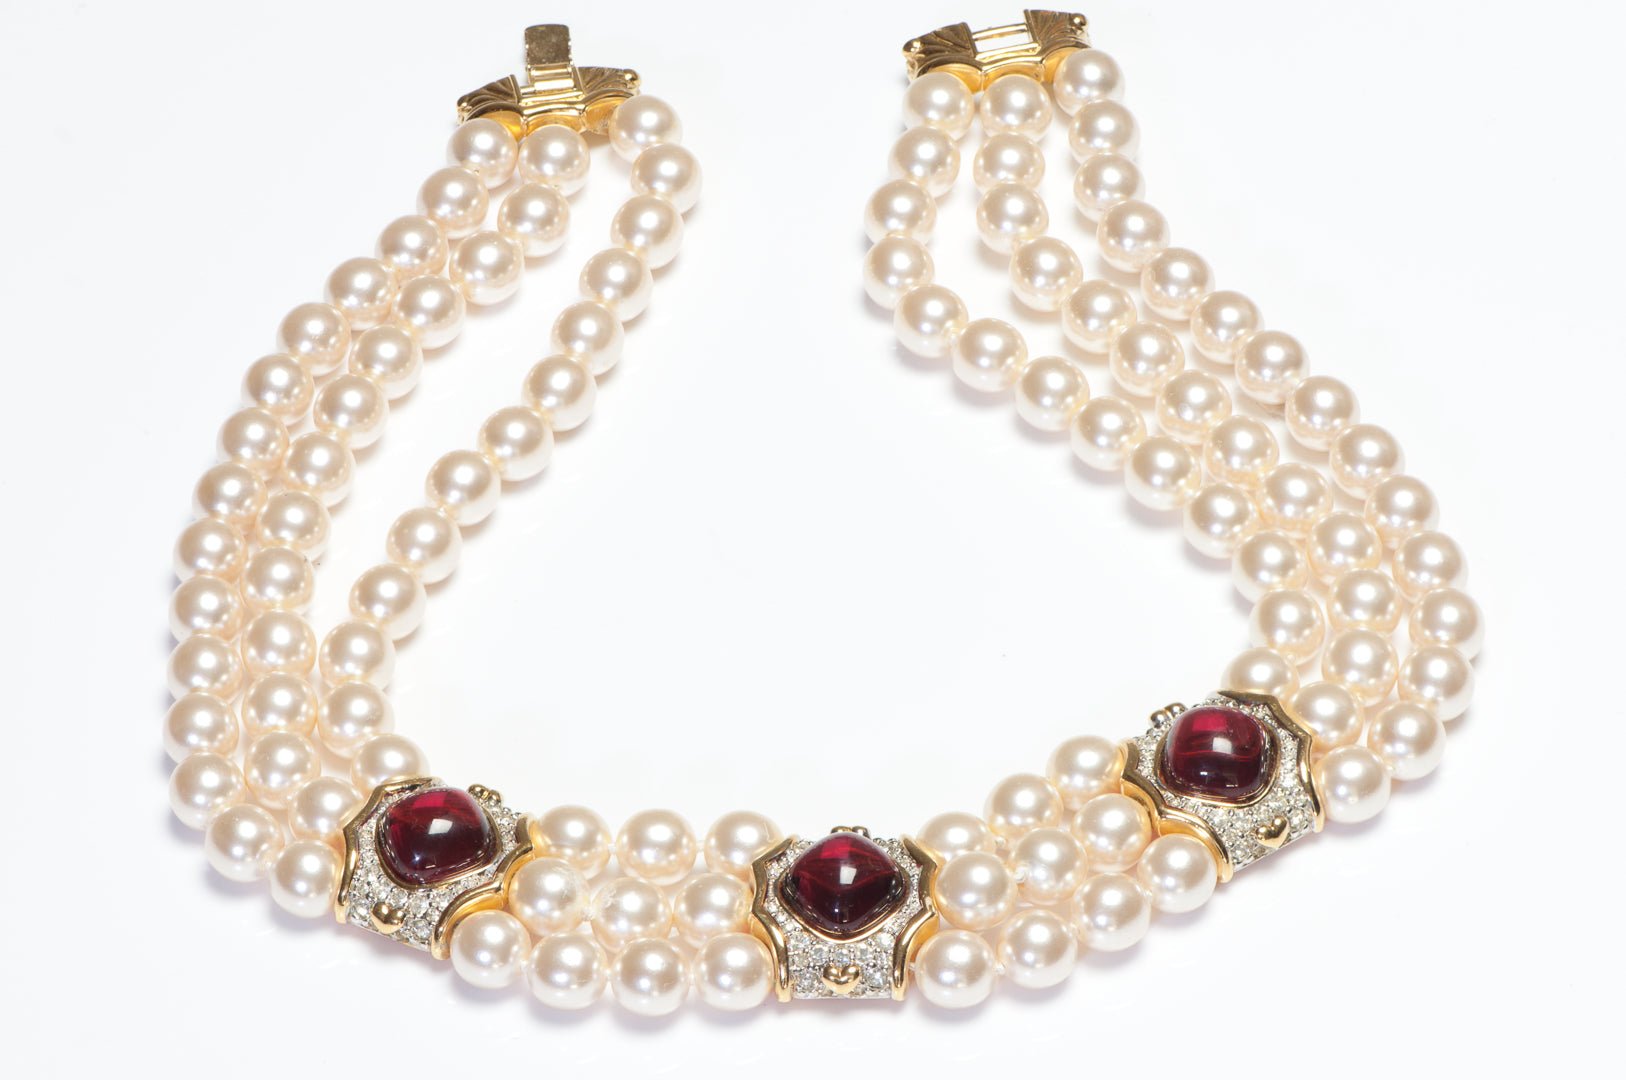 Vintage Nina Ricci Couture Mughal Style Pink Cabochon Glass Pearl Collar Necklace